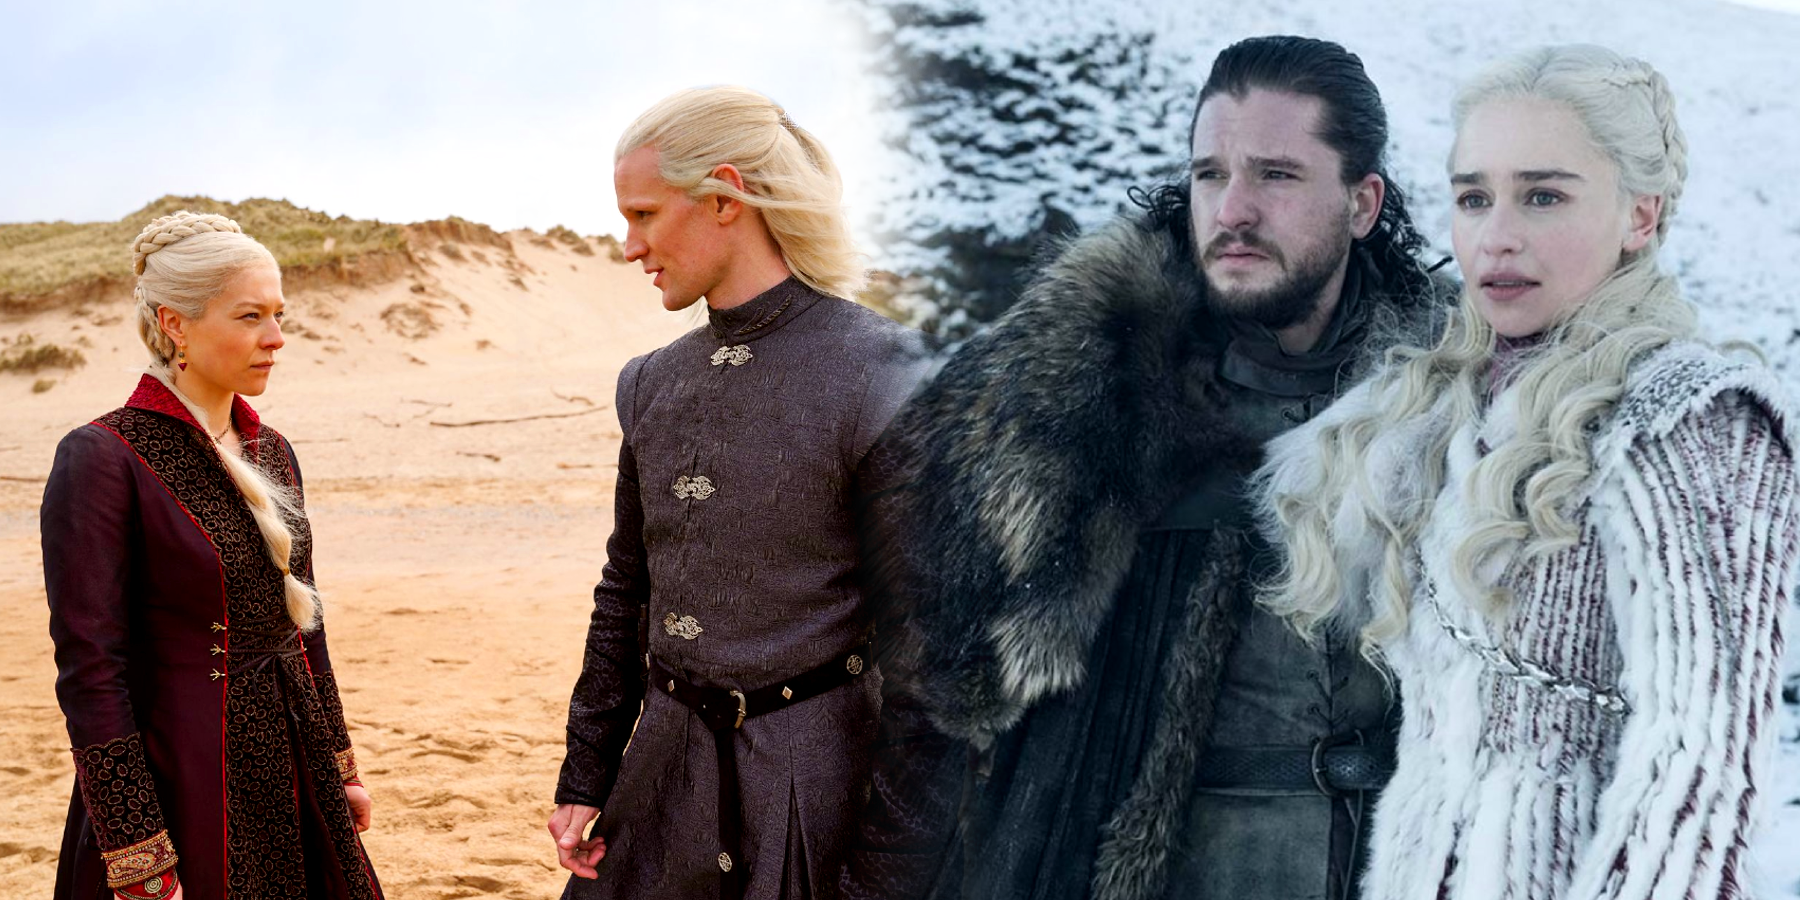 House of The Dragon vs. Game of Thrones : le jeu des sept différences